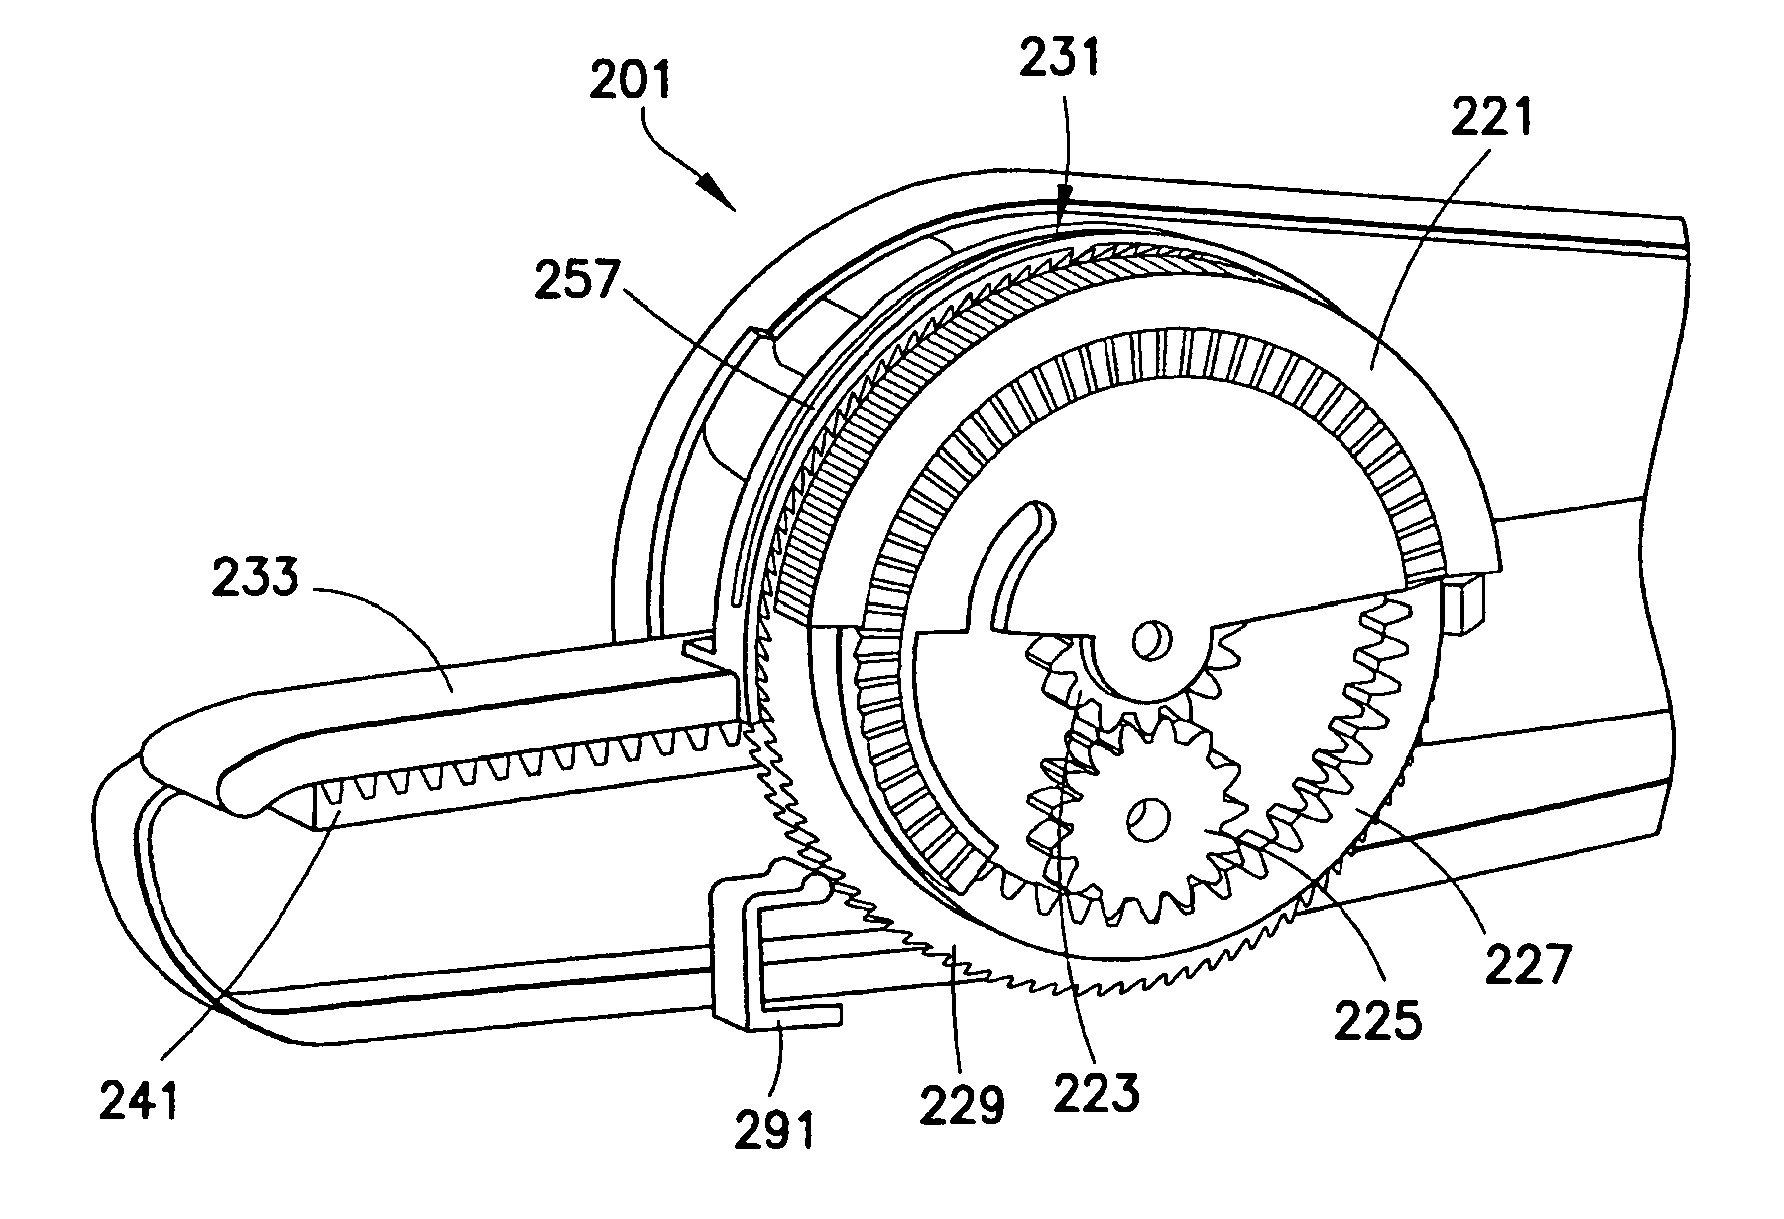 Lever and gear force multiplier medication delivery system for high pressure injection system